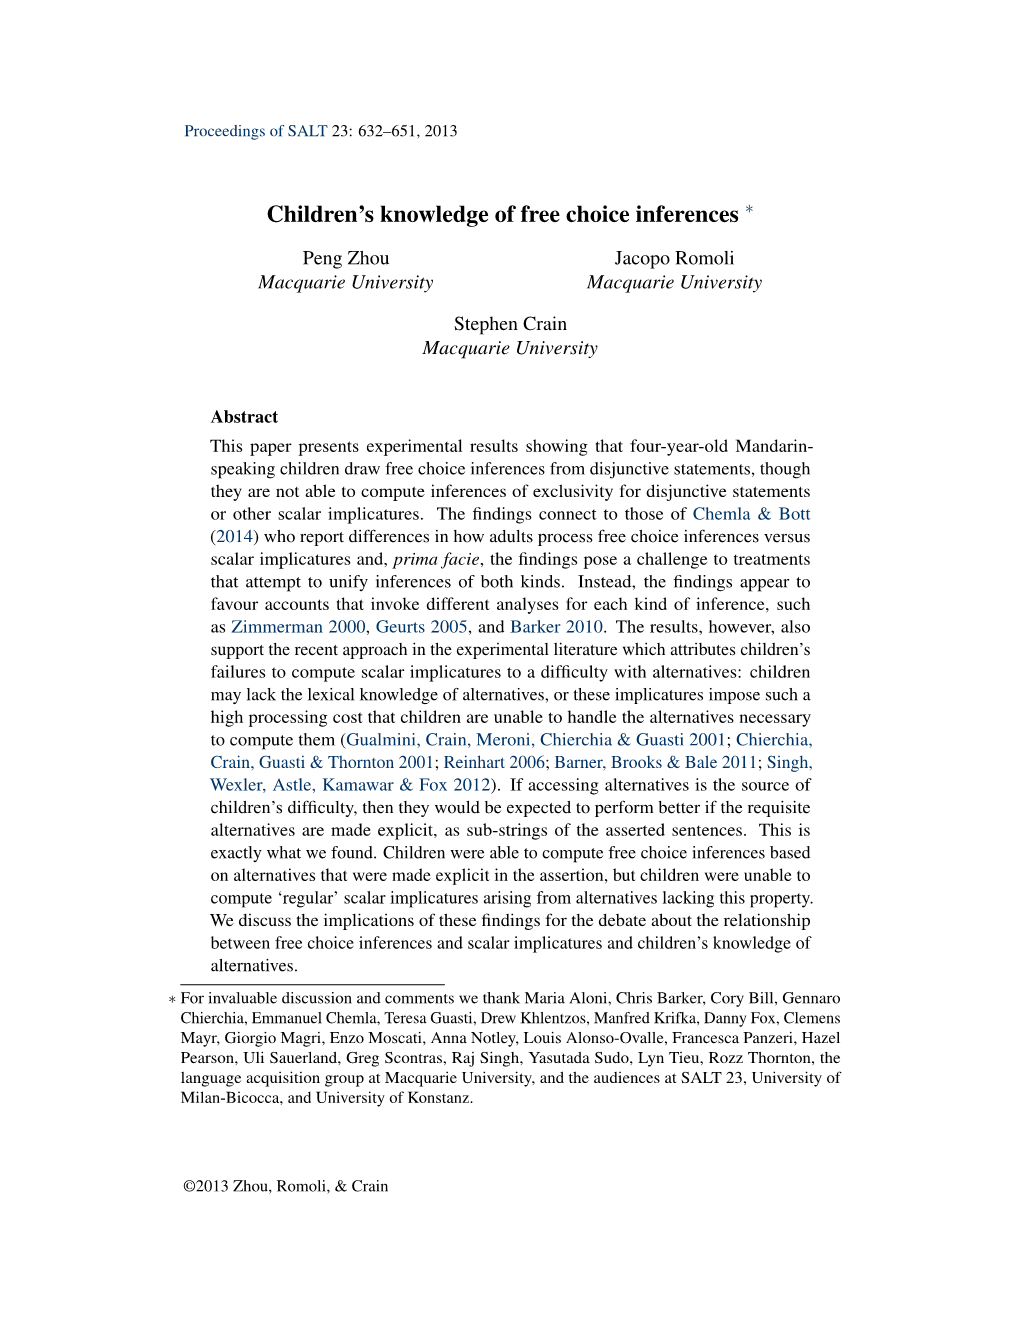 Children's Knowledge of Free Choice Inferences